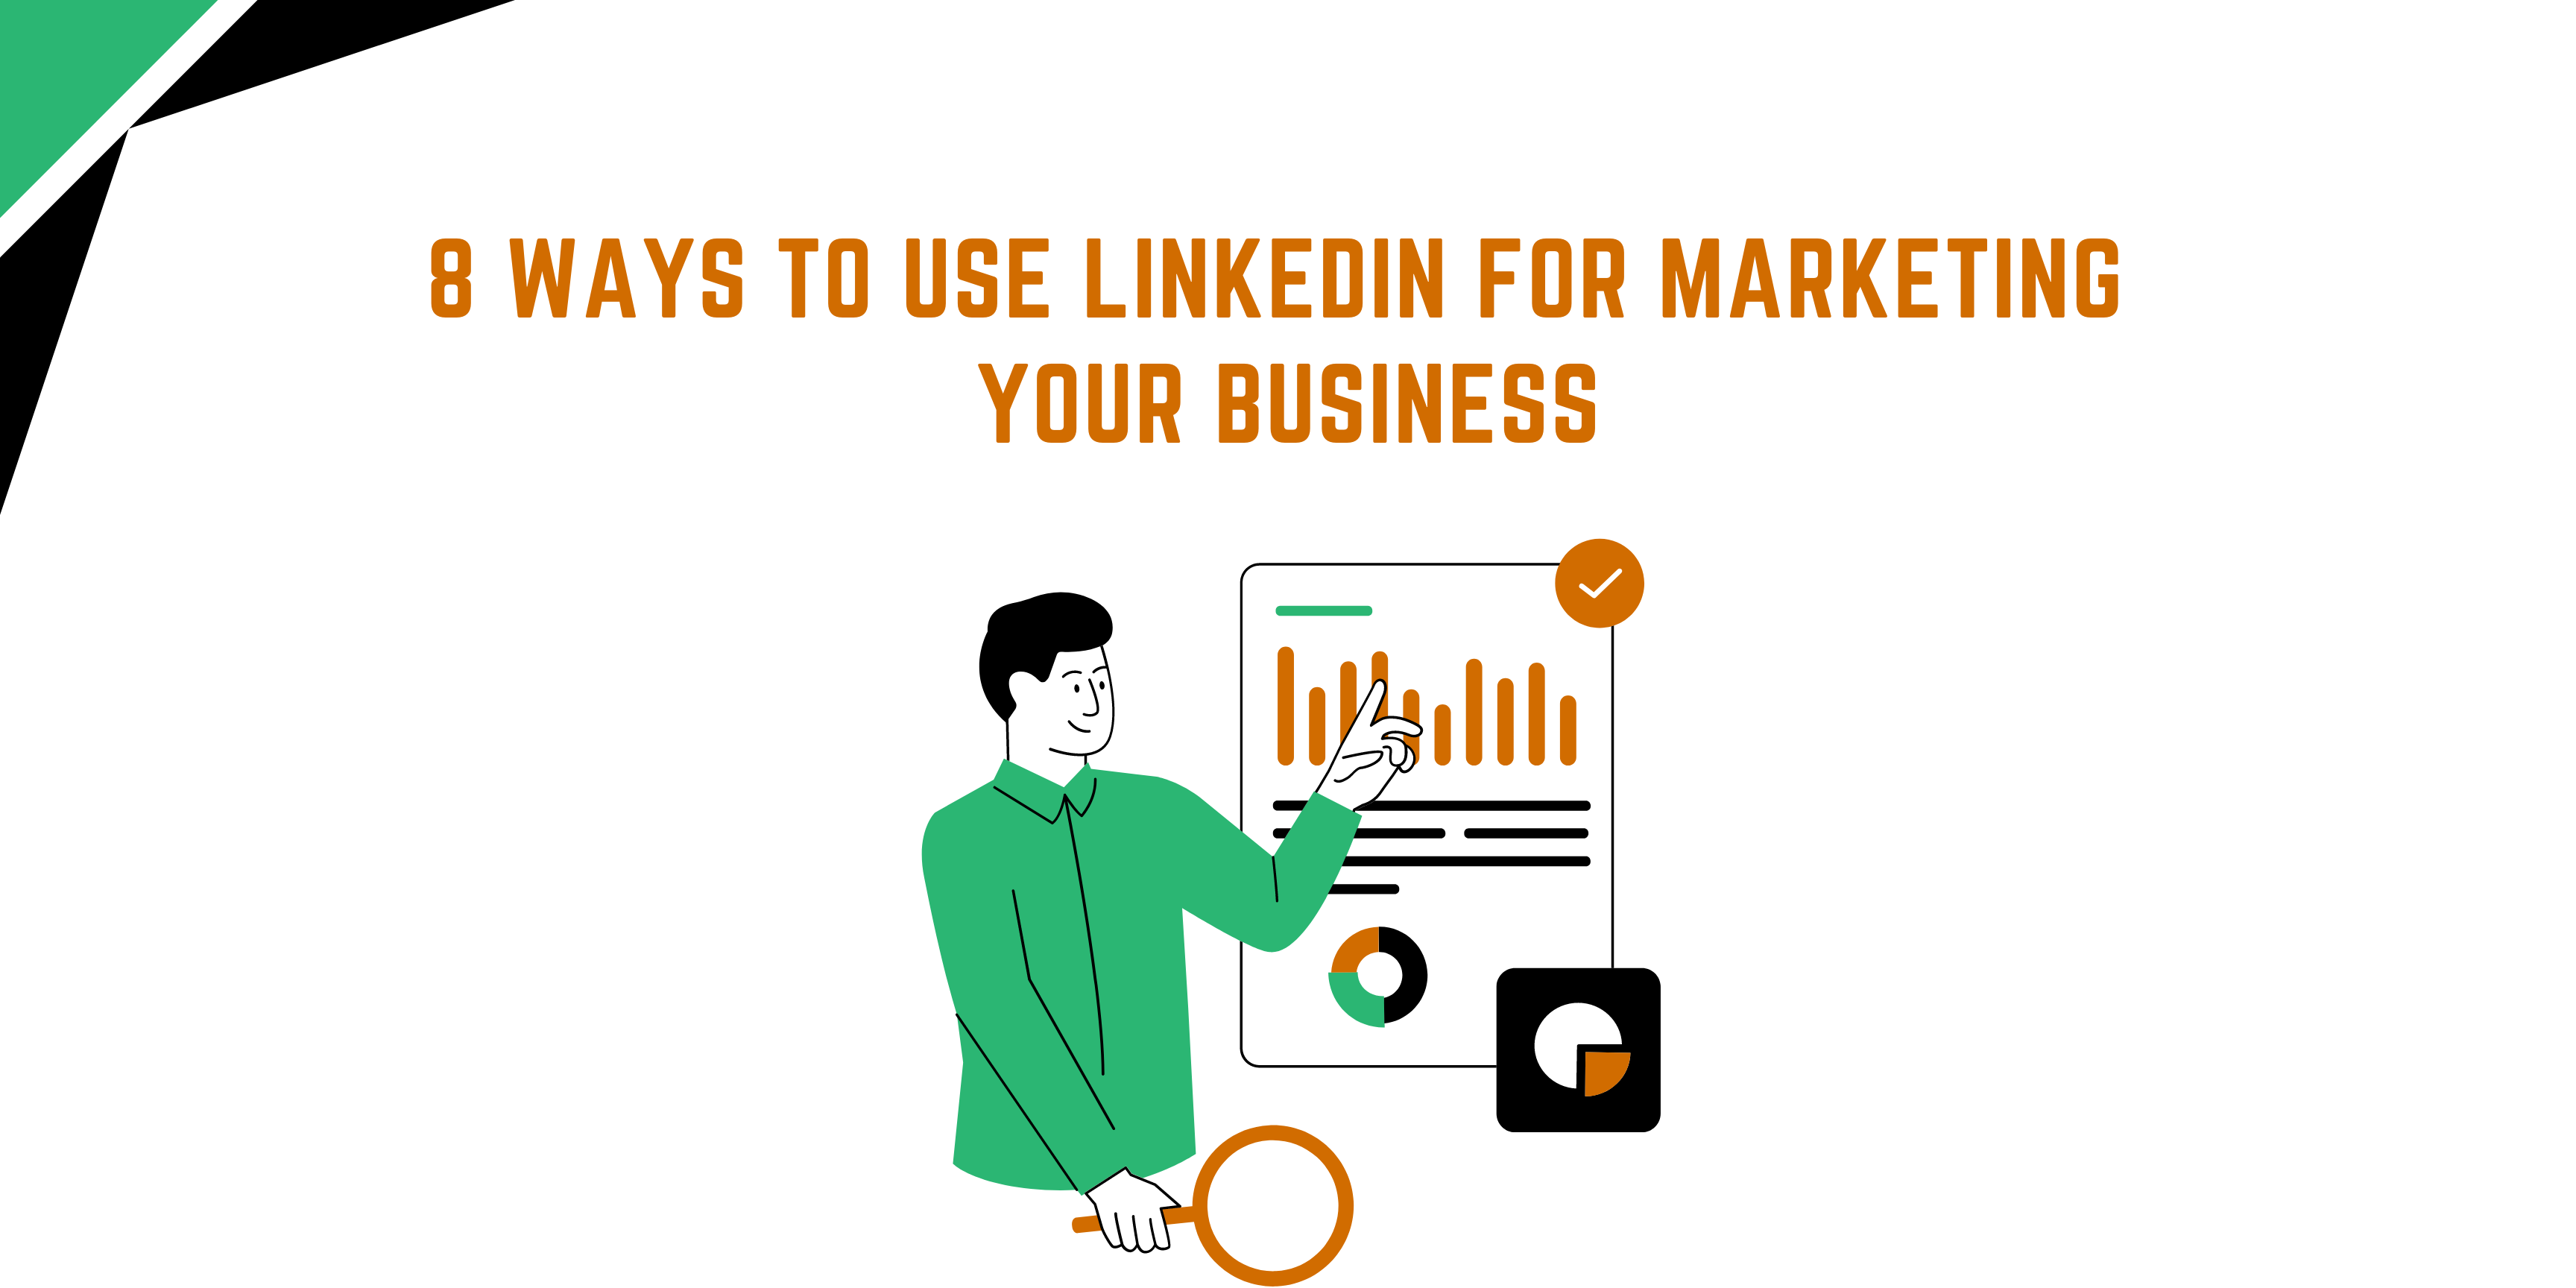 8 Ways to Use LinkedIn for Marketing Your Business